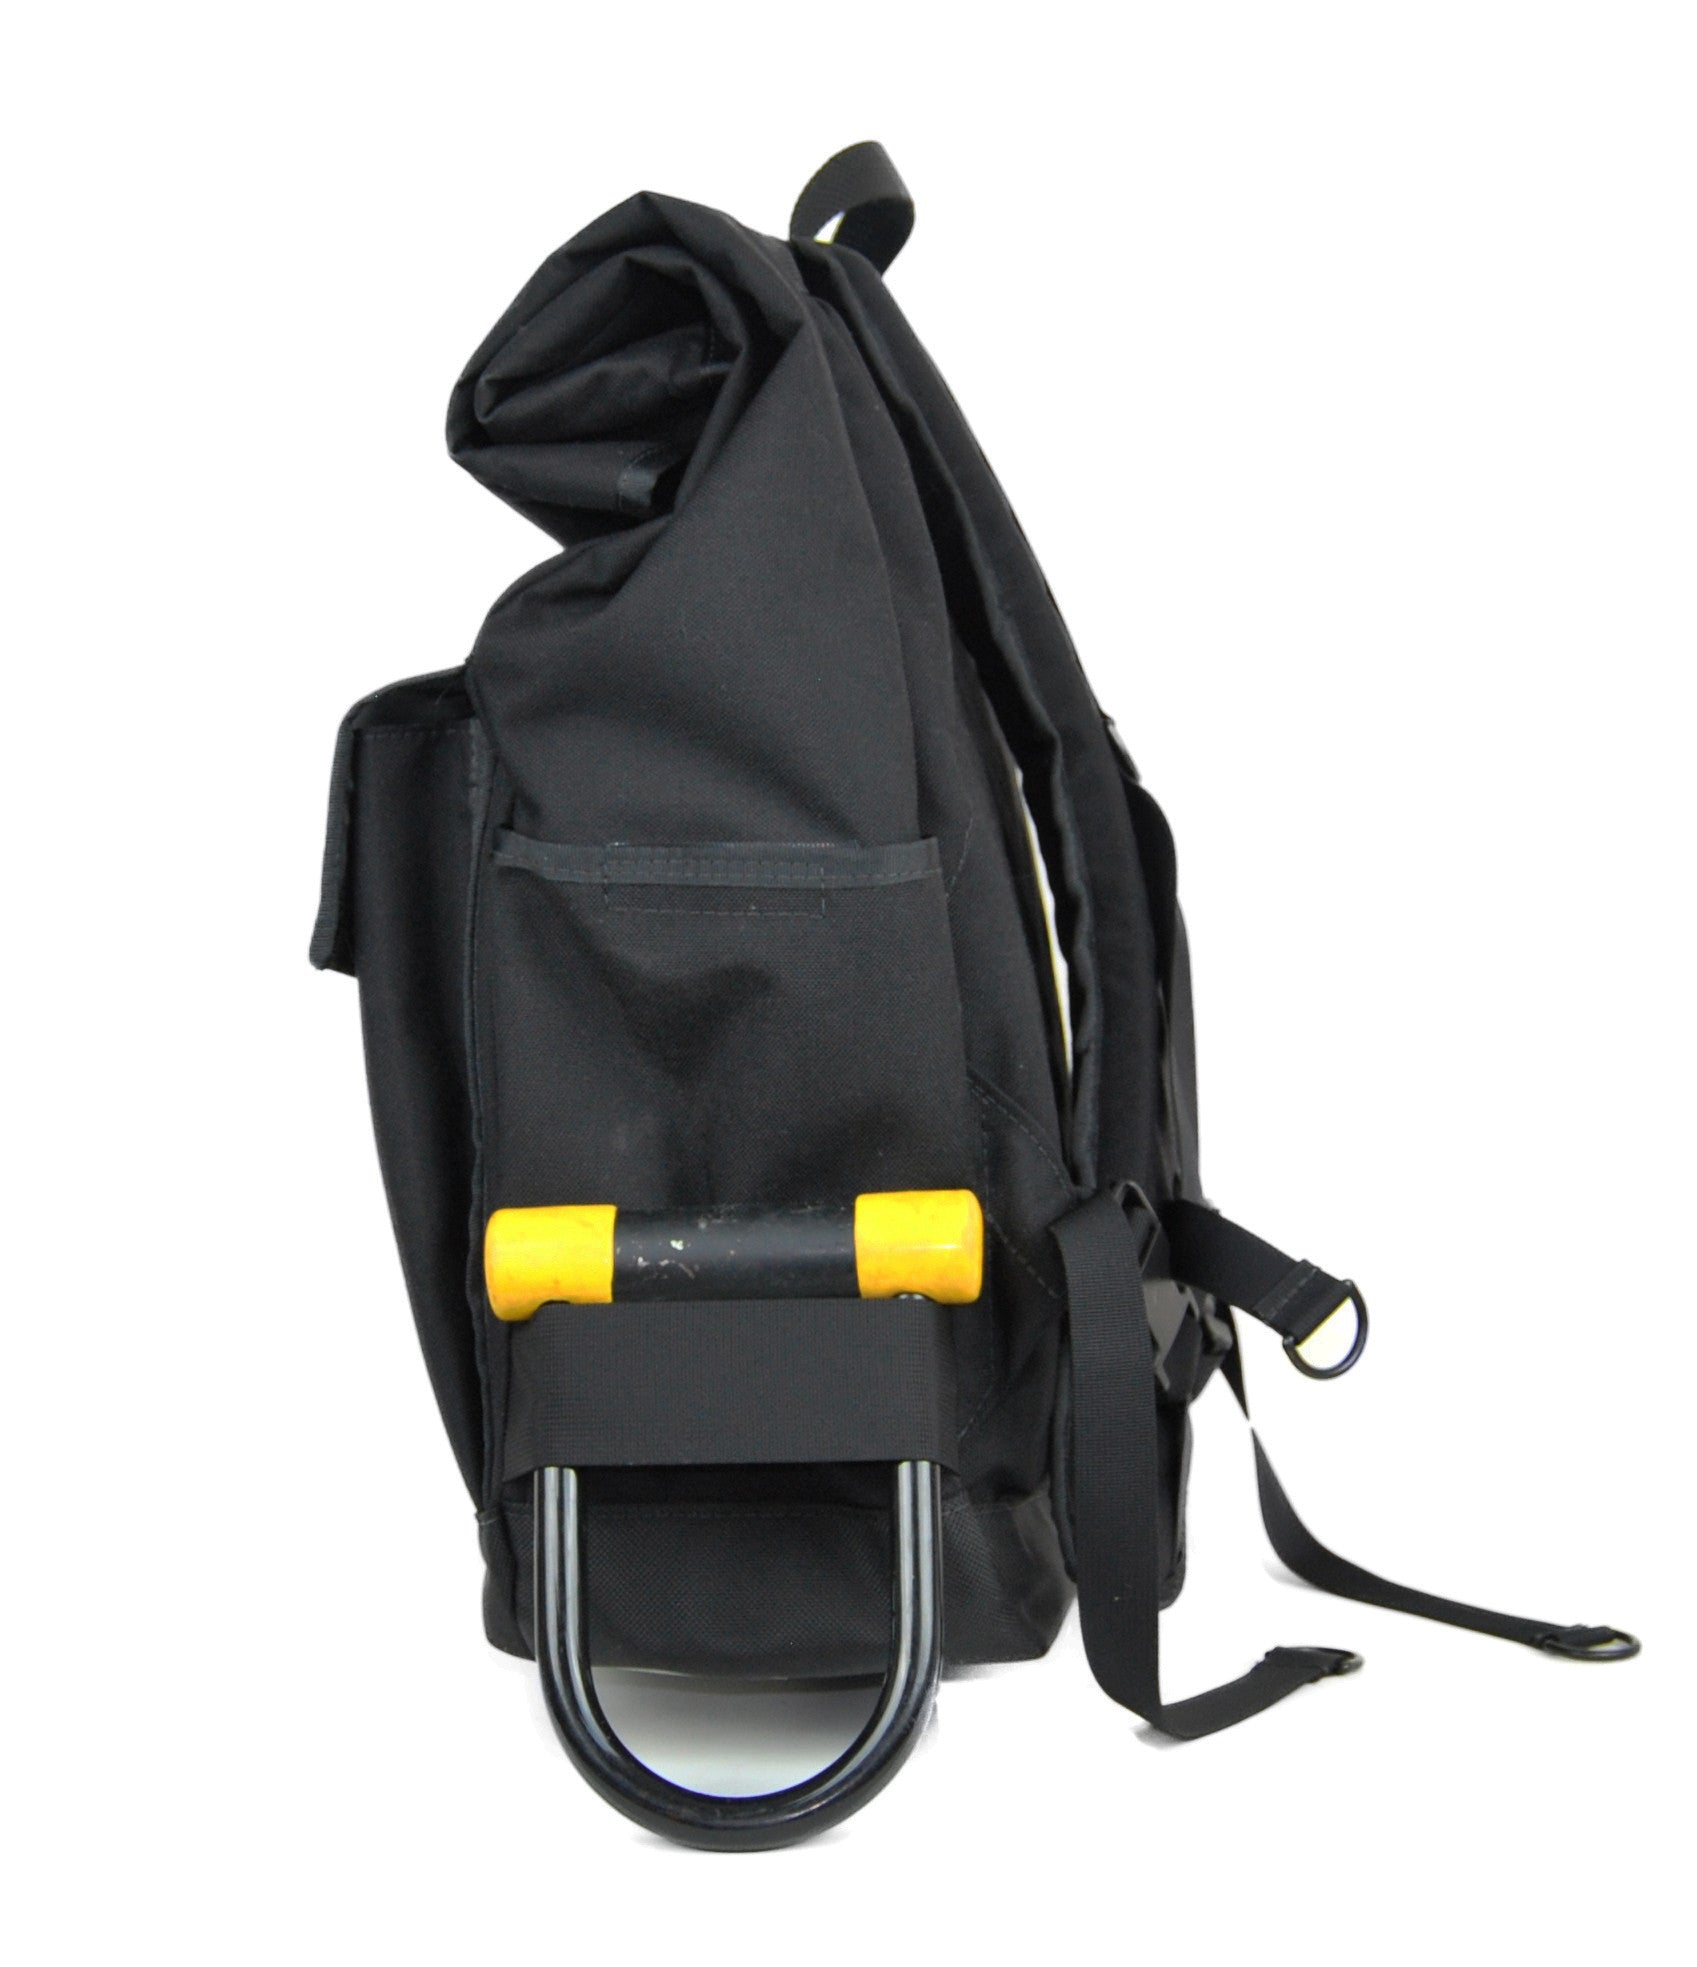 Black Roll Top Backpack With Silver Lining